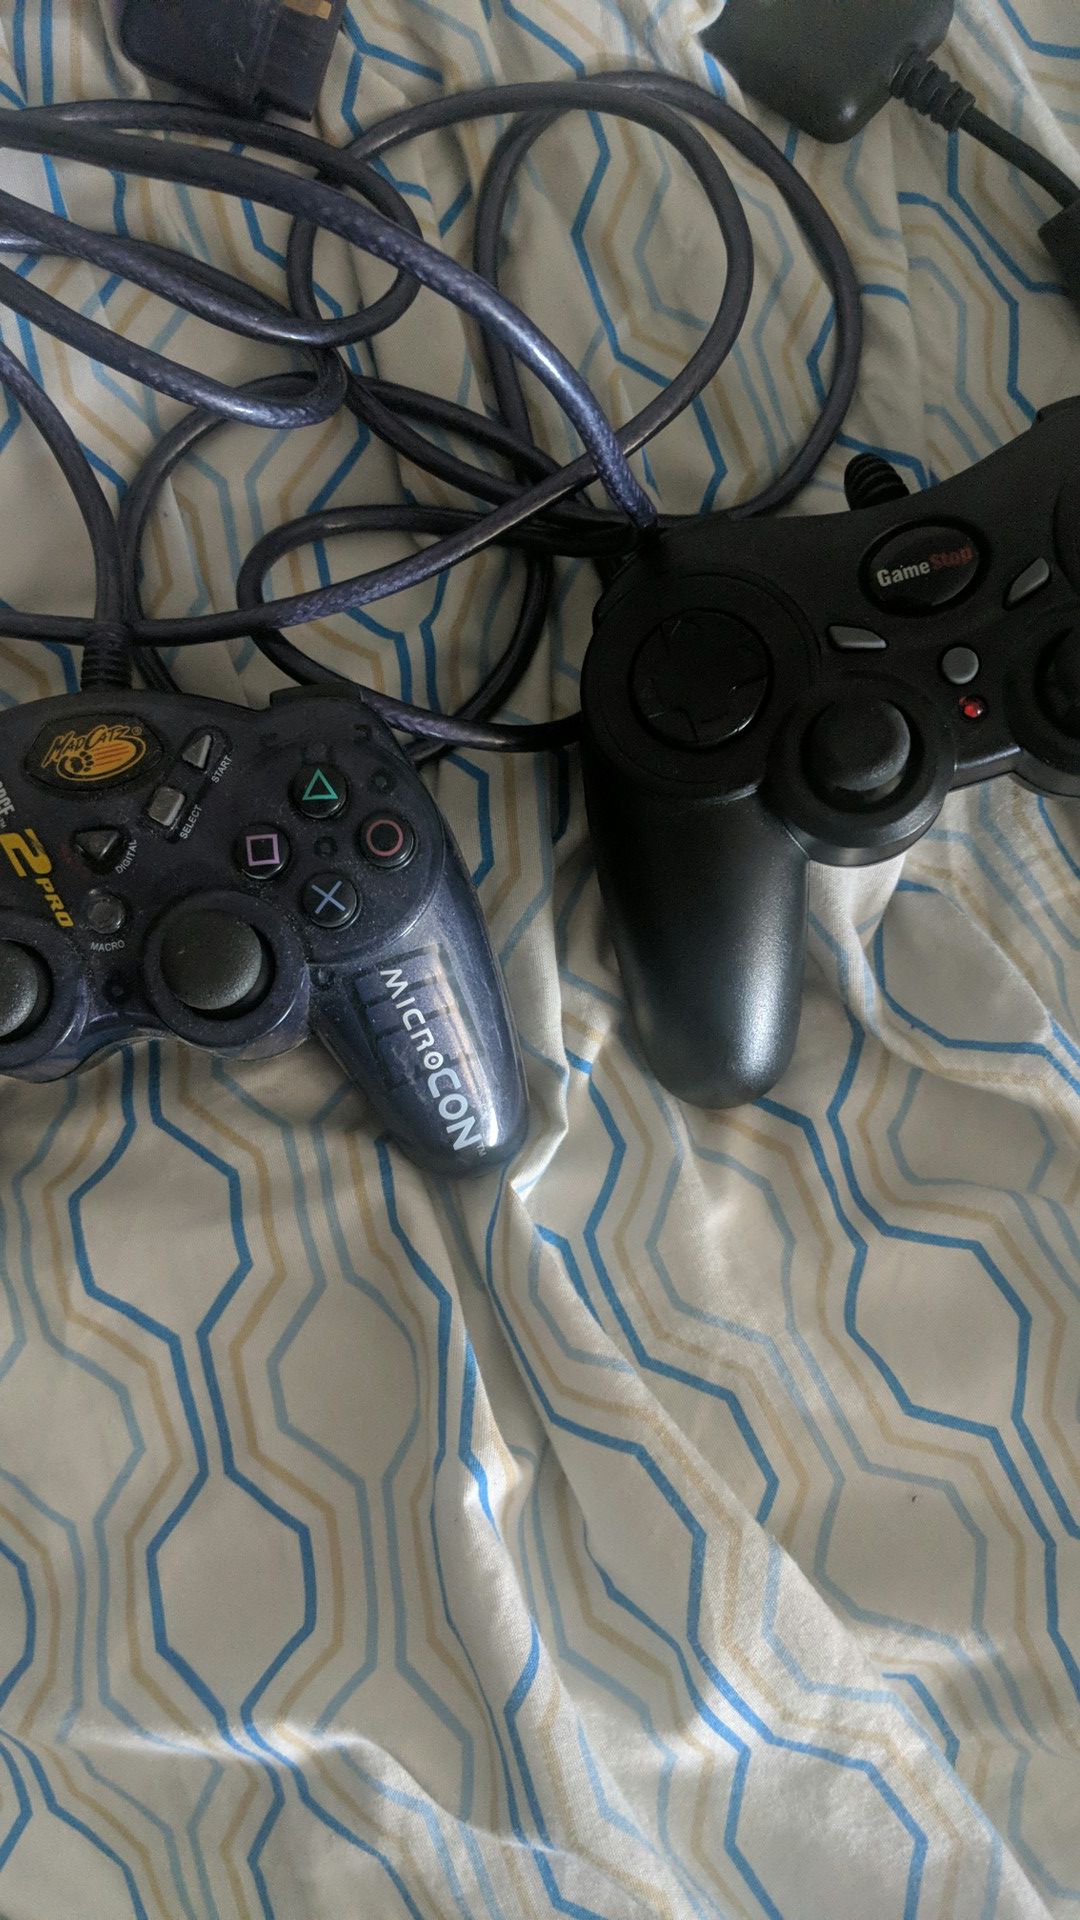 2 PlayStation 2 PS2 controllers